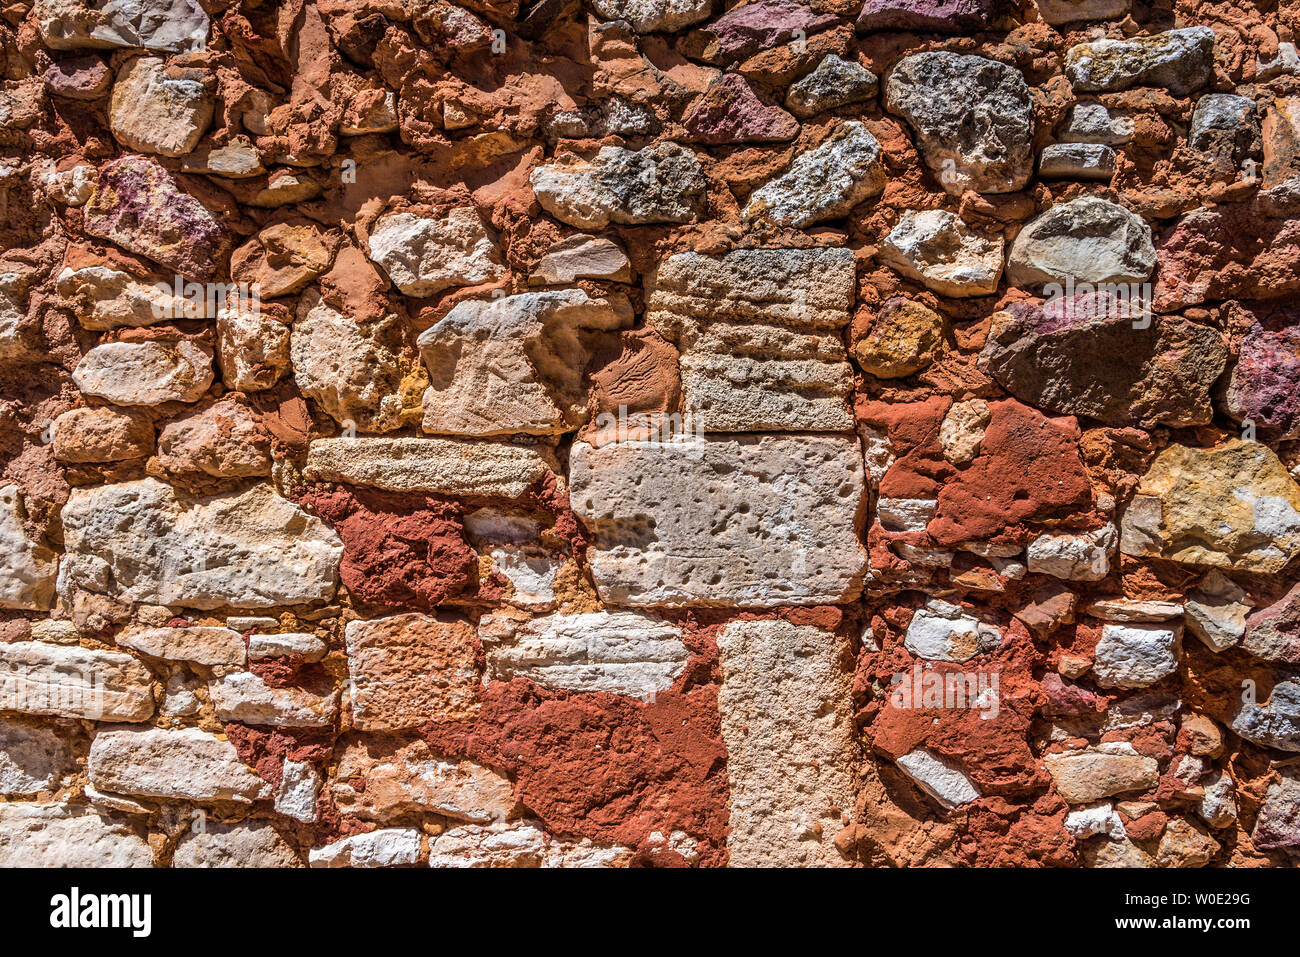 France, Vaucluse, stonework on a wall of Roussillon (Plus Beaux Villages de France - Most Beautiful Villages of France) Stock Photo